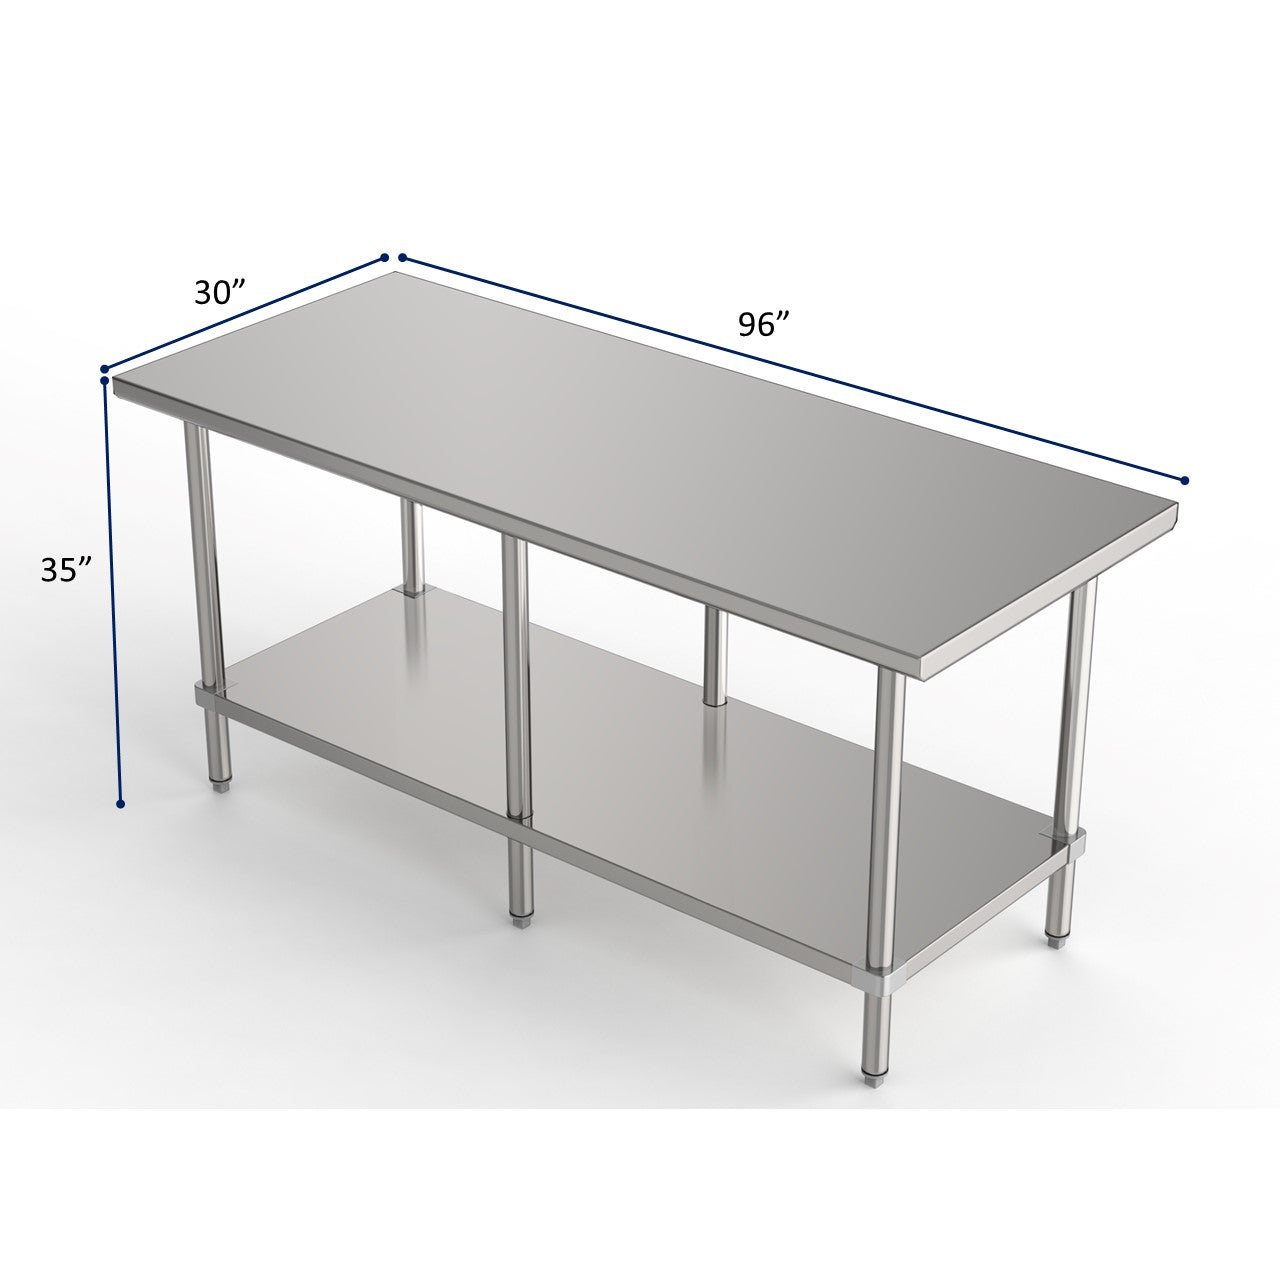 GSW Commercial Grade Flat Top Work Table with Stainless Steel Top, Galvanized Undershelf & Legs, Adjustable Bullet Feet, NSF/ETL Approved to Meet Sanitation Food Service Standard 37 (30"W x 96"L x 35"H)